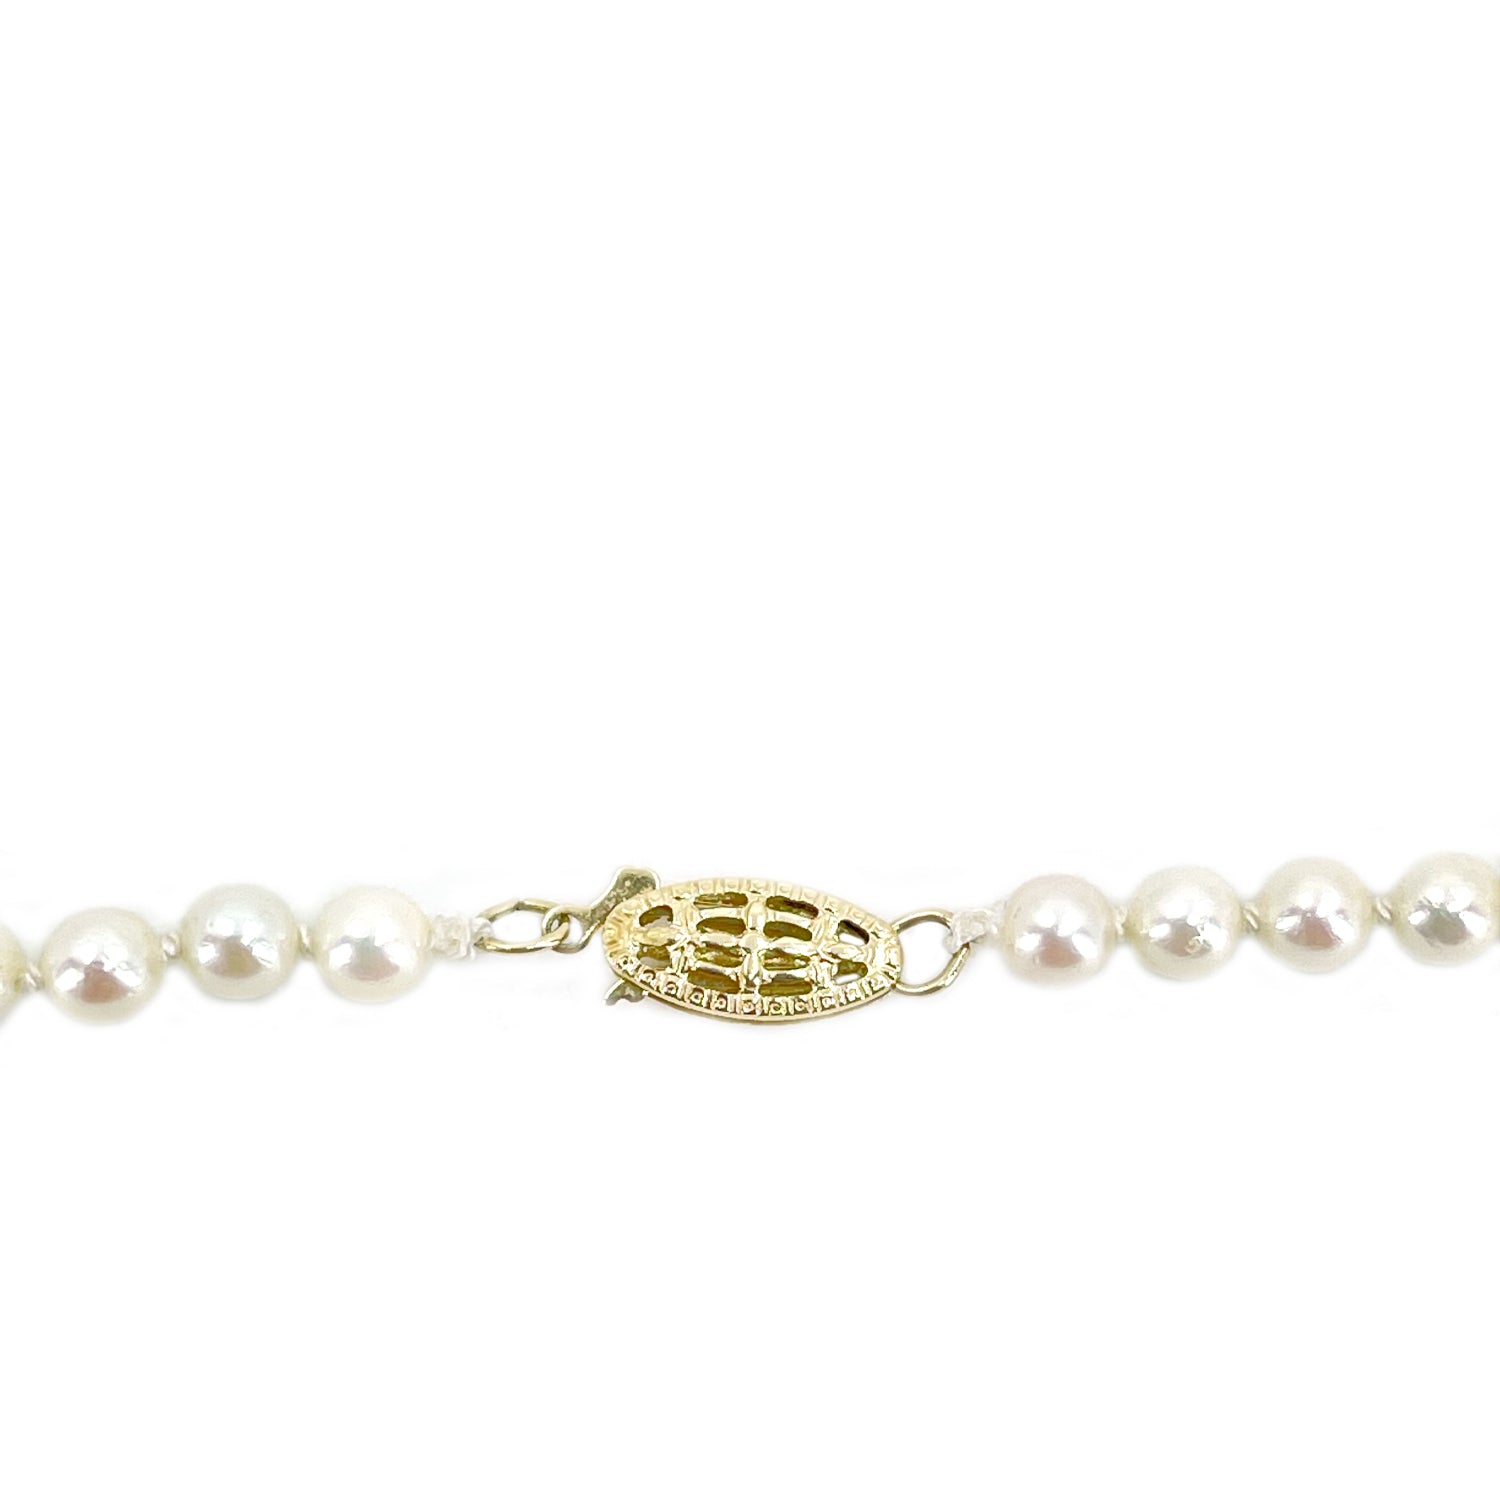 Petite Choker Modernist Japanese Cultured Saltwater Akoya Pearl Vintage Necklace - 14K Yellow Gold 16.50 Inch